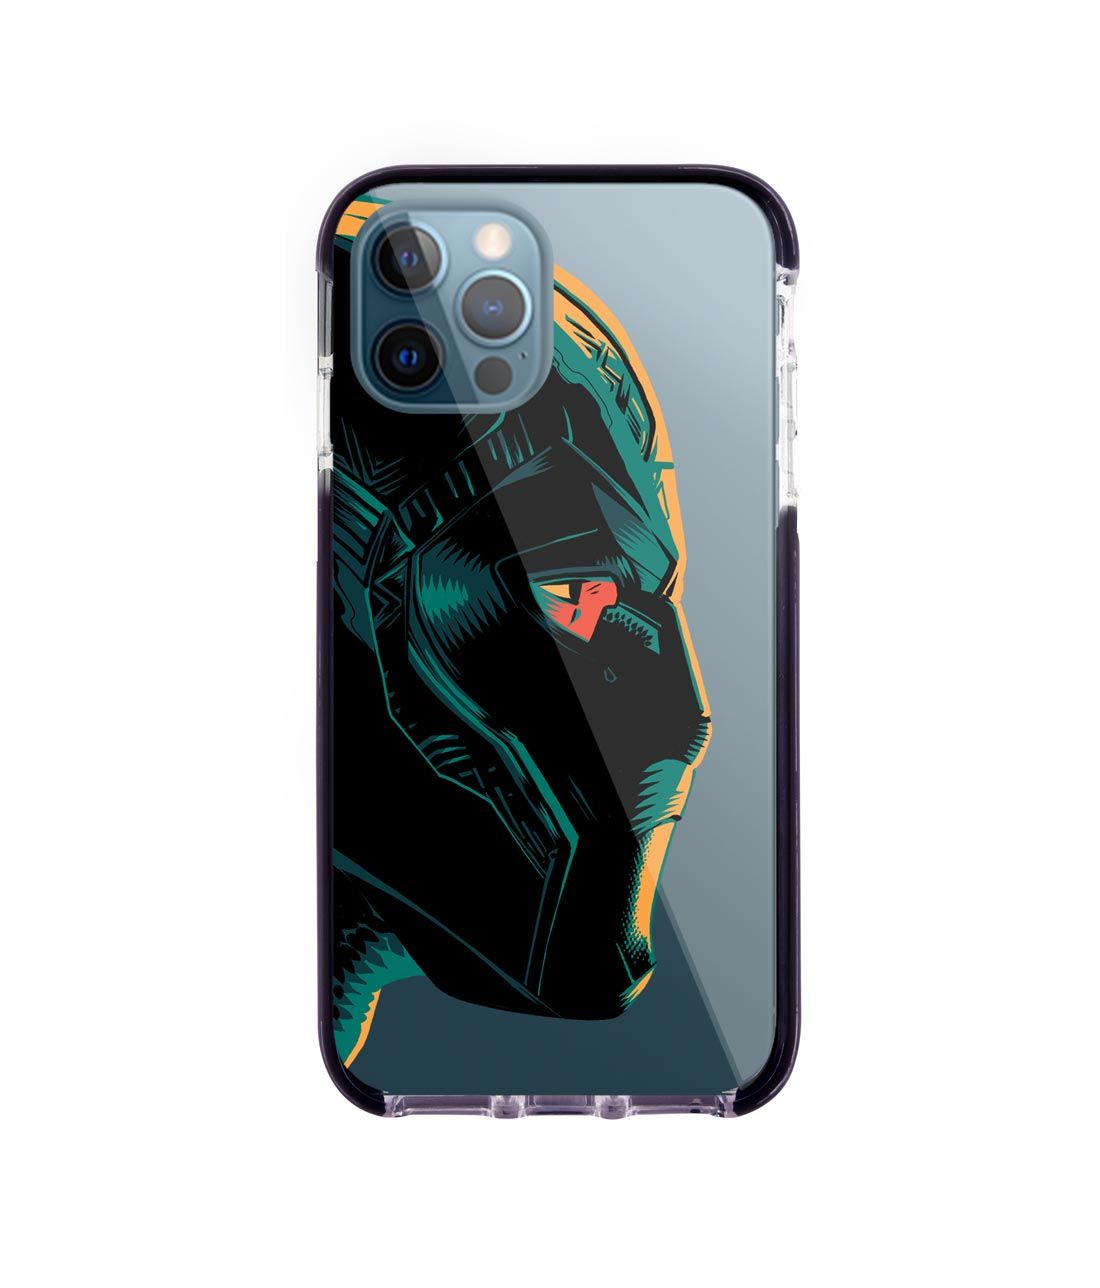 Illuminated Black Panther - Extreme Case for iPhone 12 Pro Max